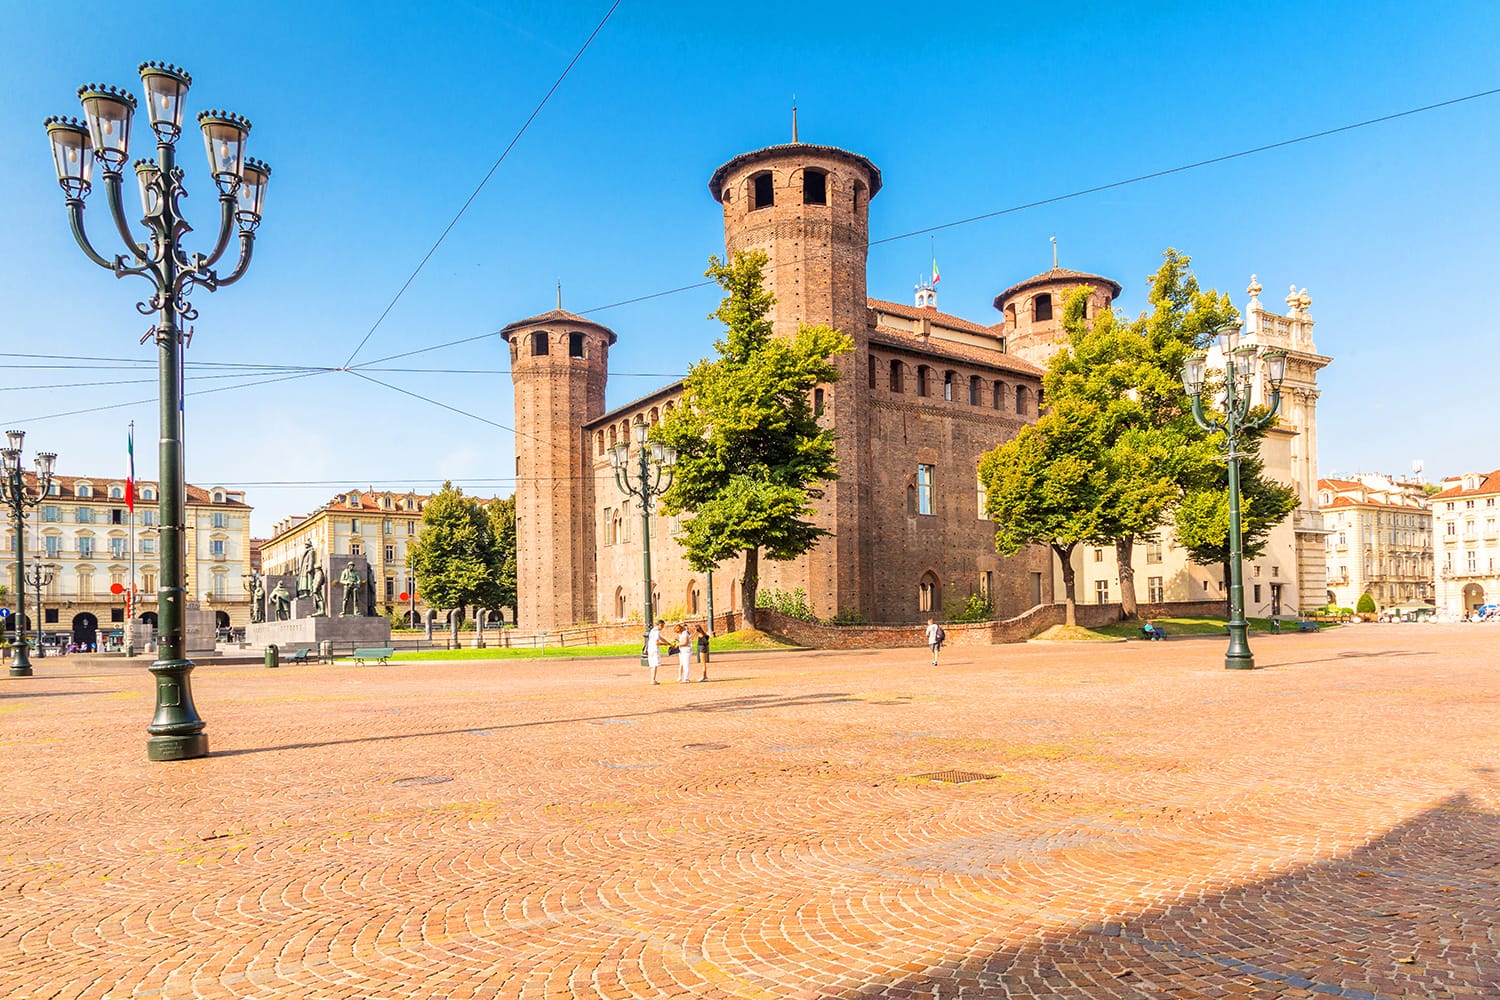 The Medieval Acaja Castle in Castle Square in Turin, Piedmont, Italy